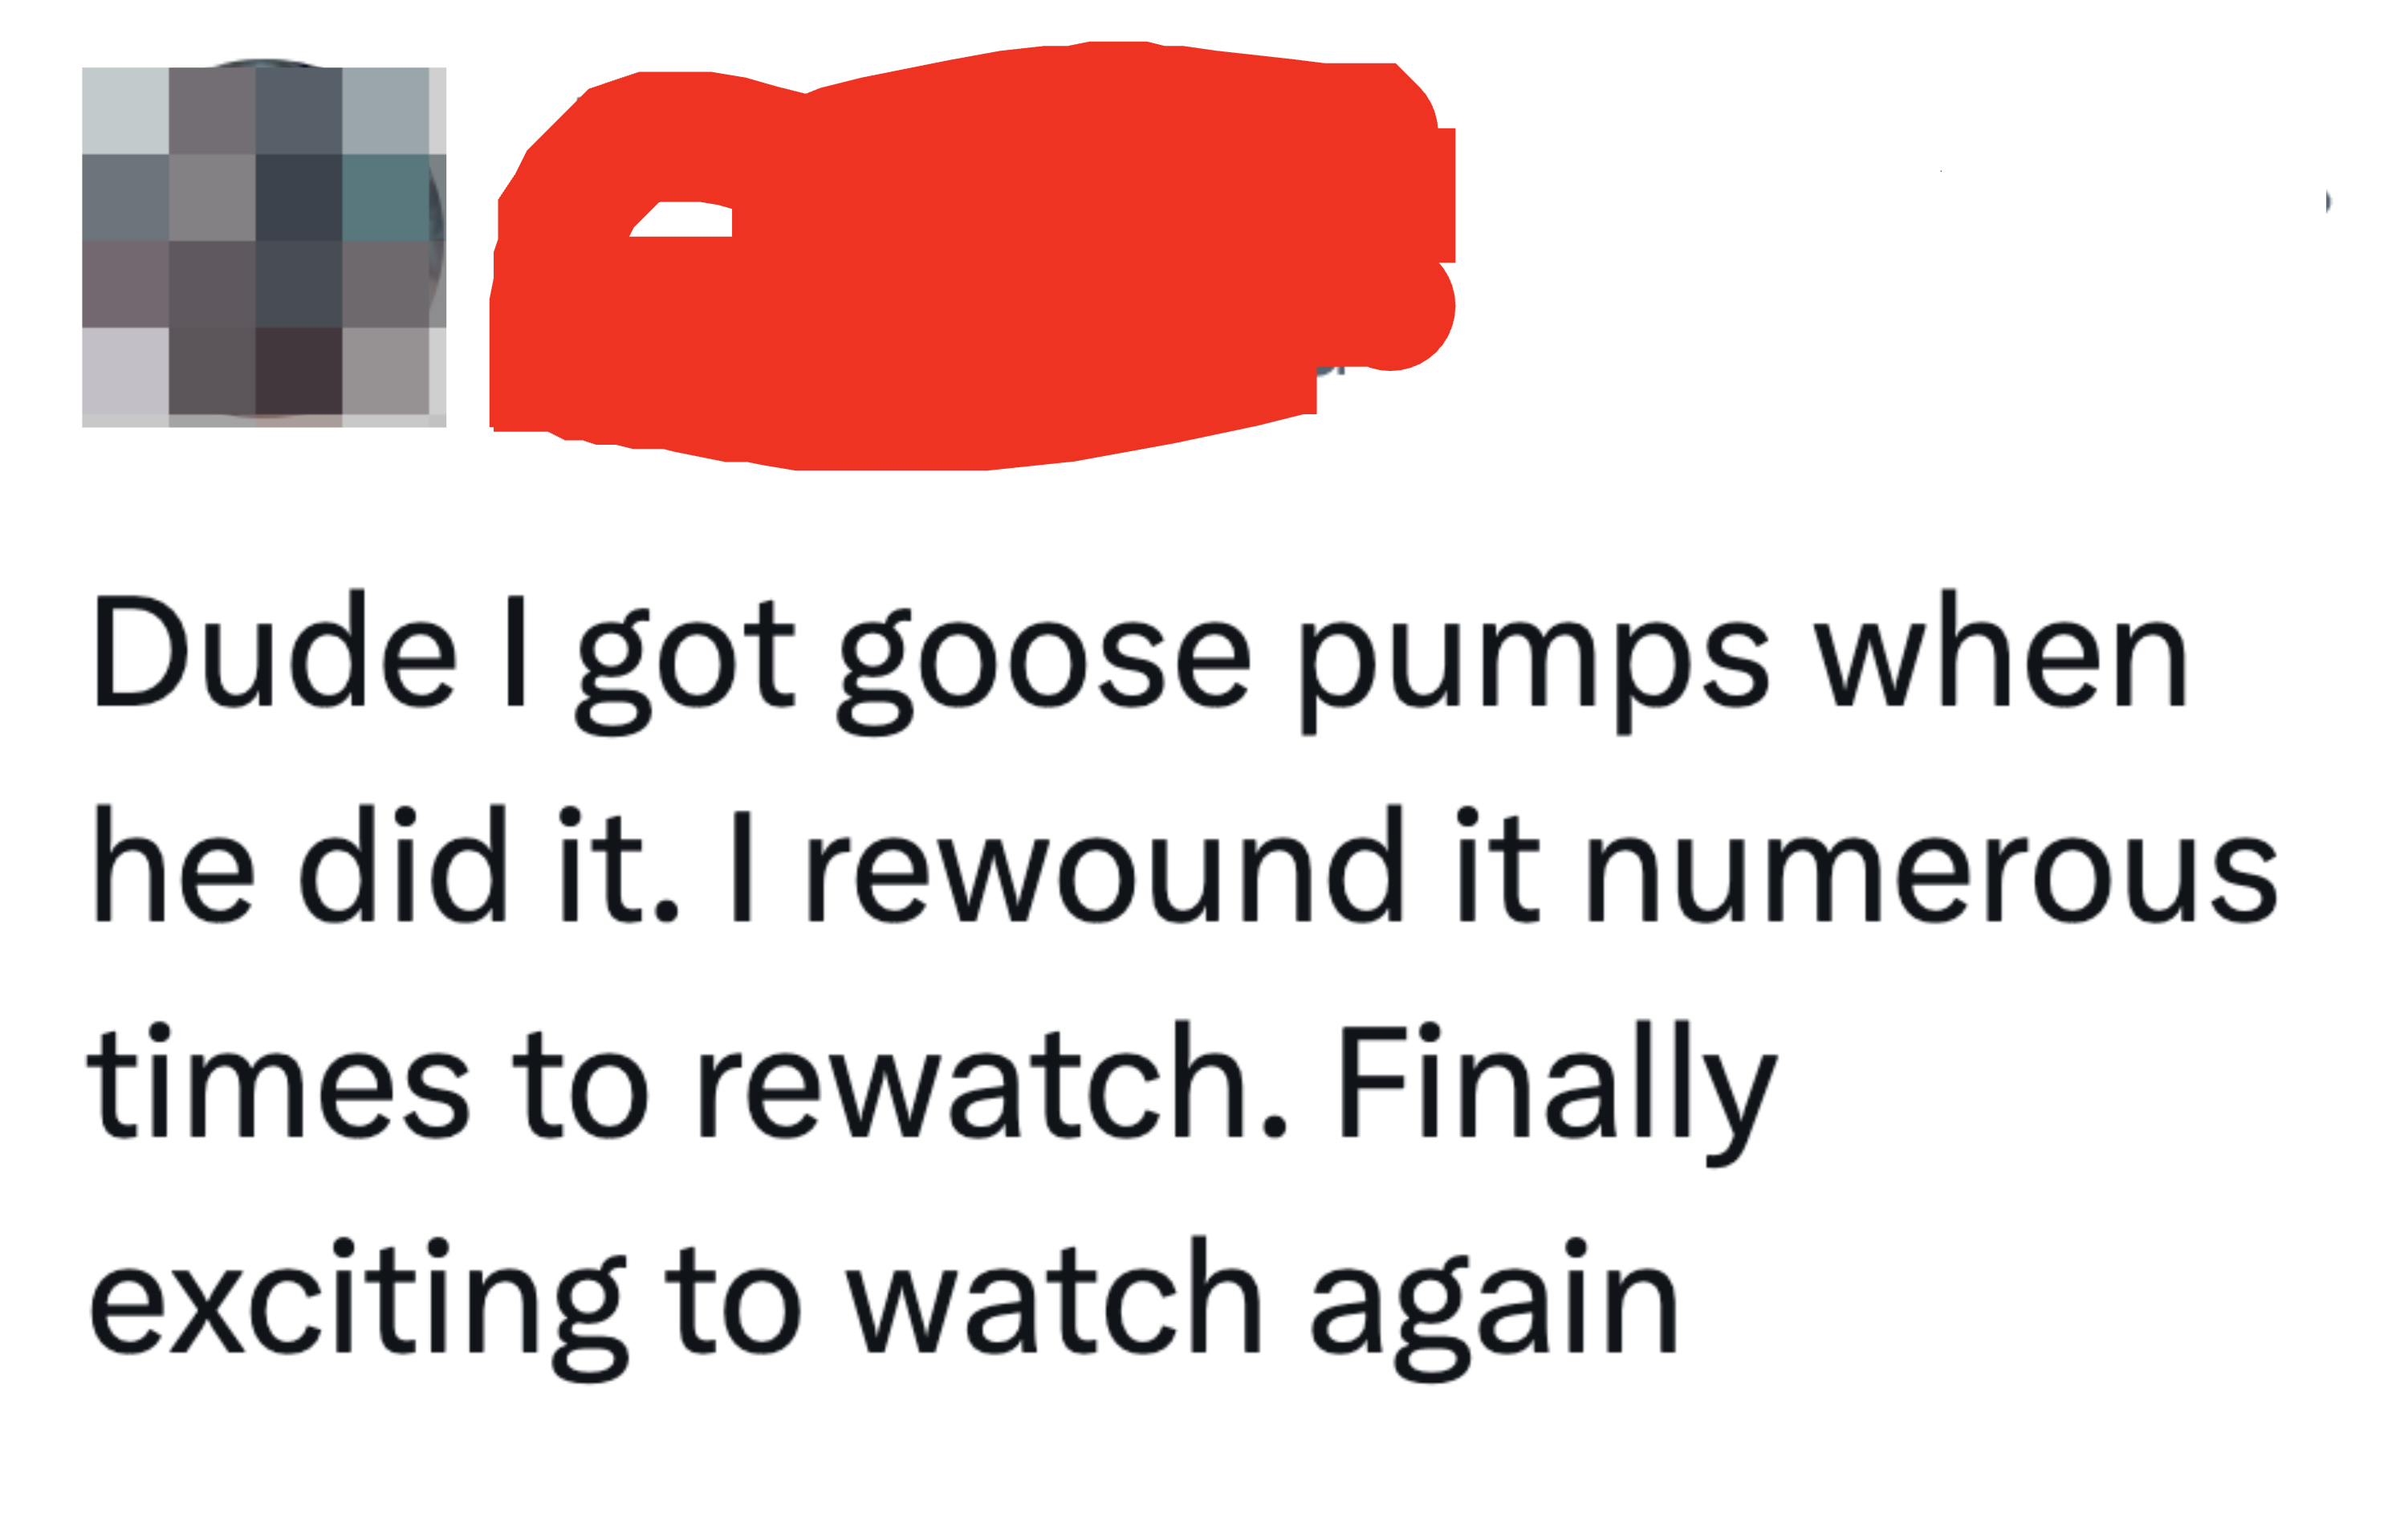 &quot;Dude I got goose pumps when he did it; I rewound it numerous times to rewatch; finally exciting to watch again&quot;